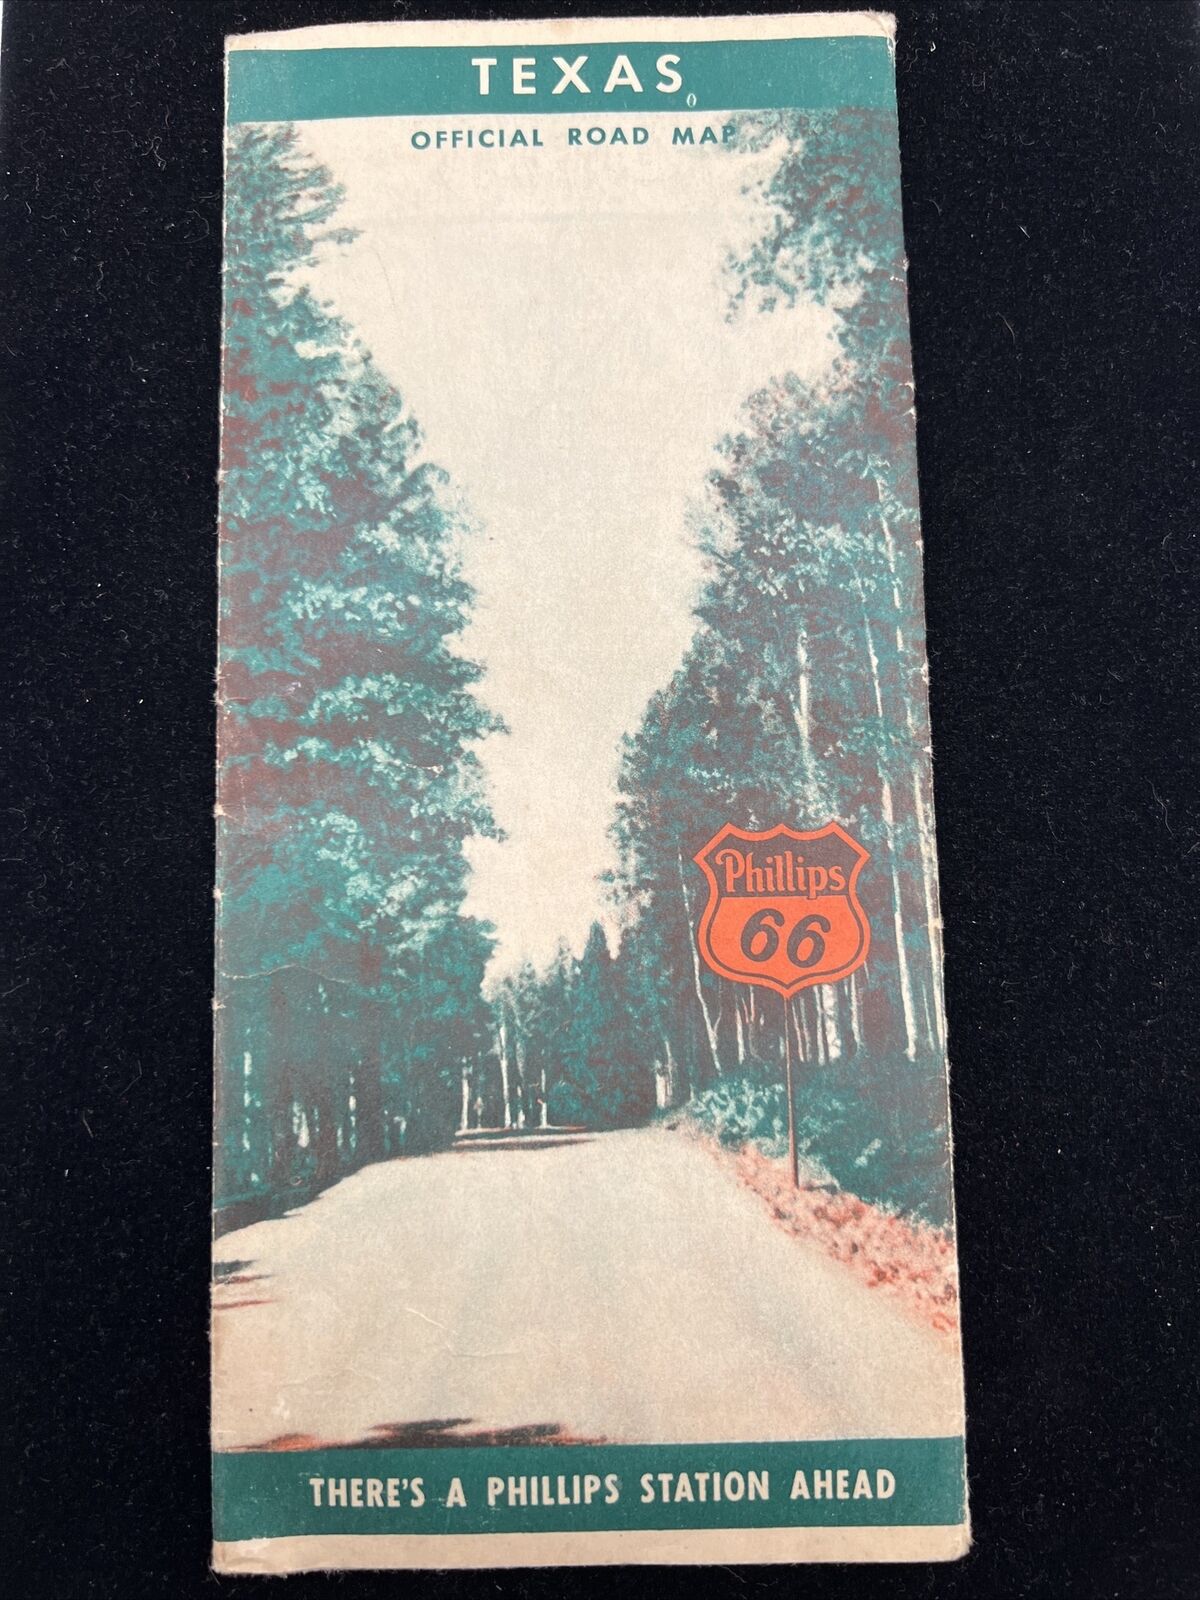 1942 Texas Official Road Map Phillips 66 Advertisement